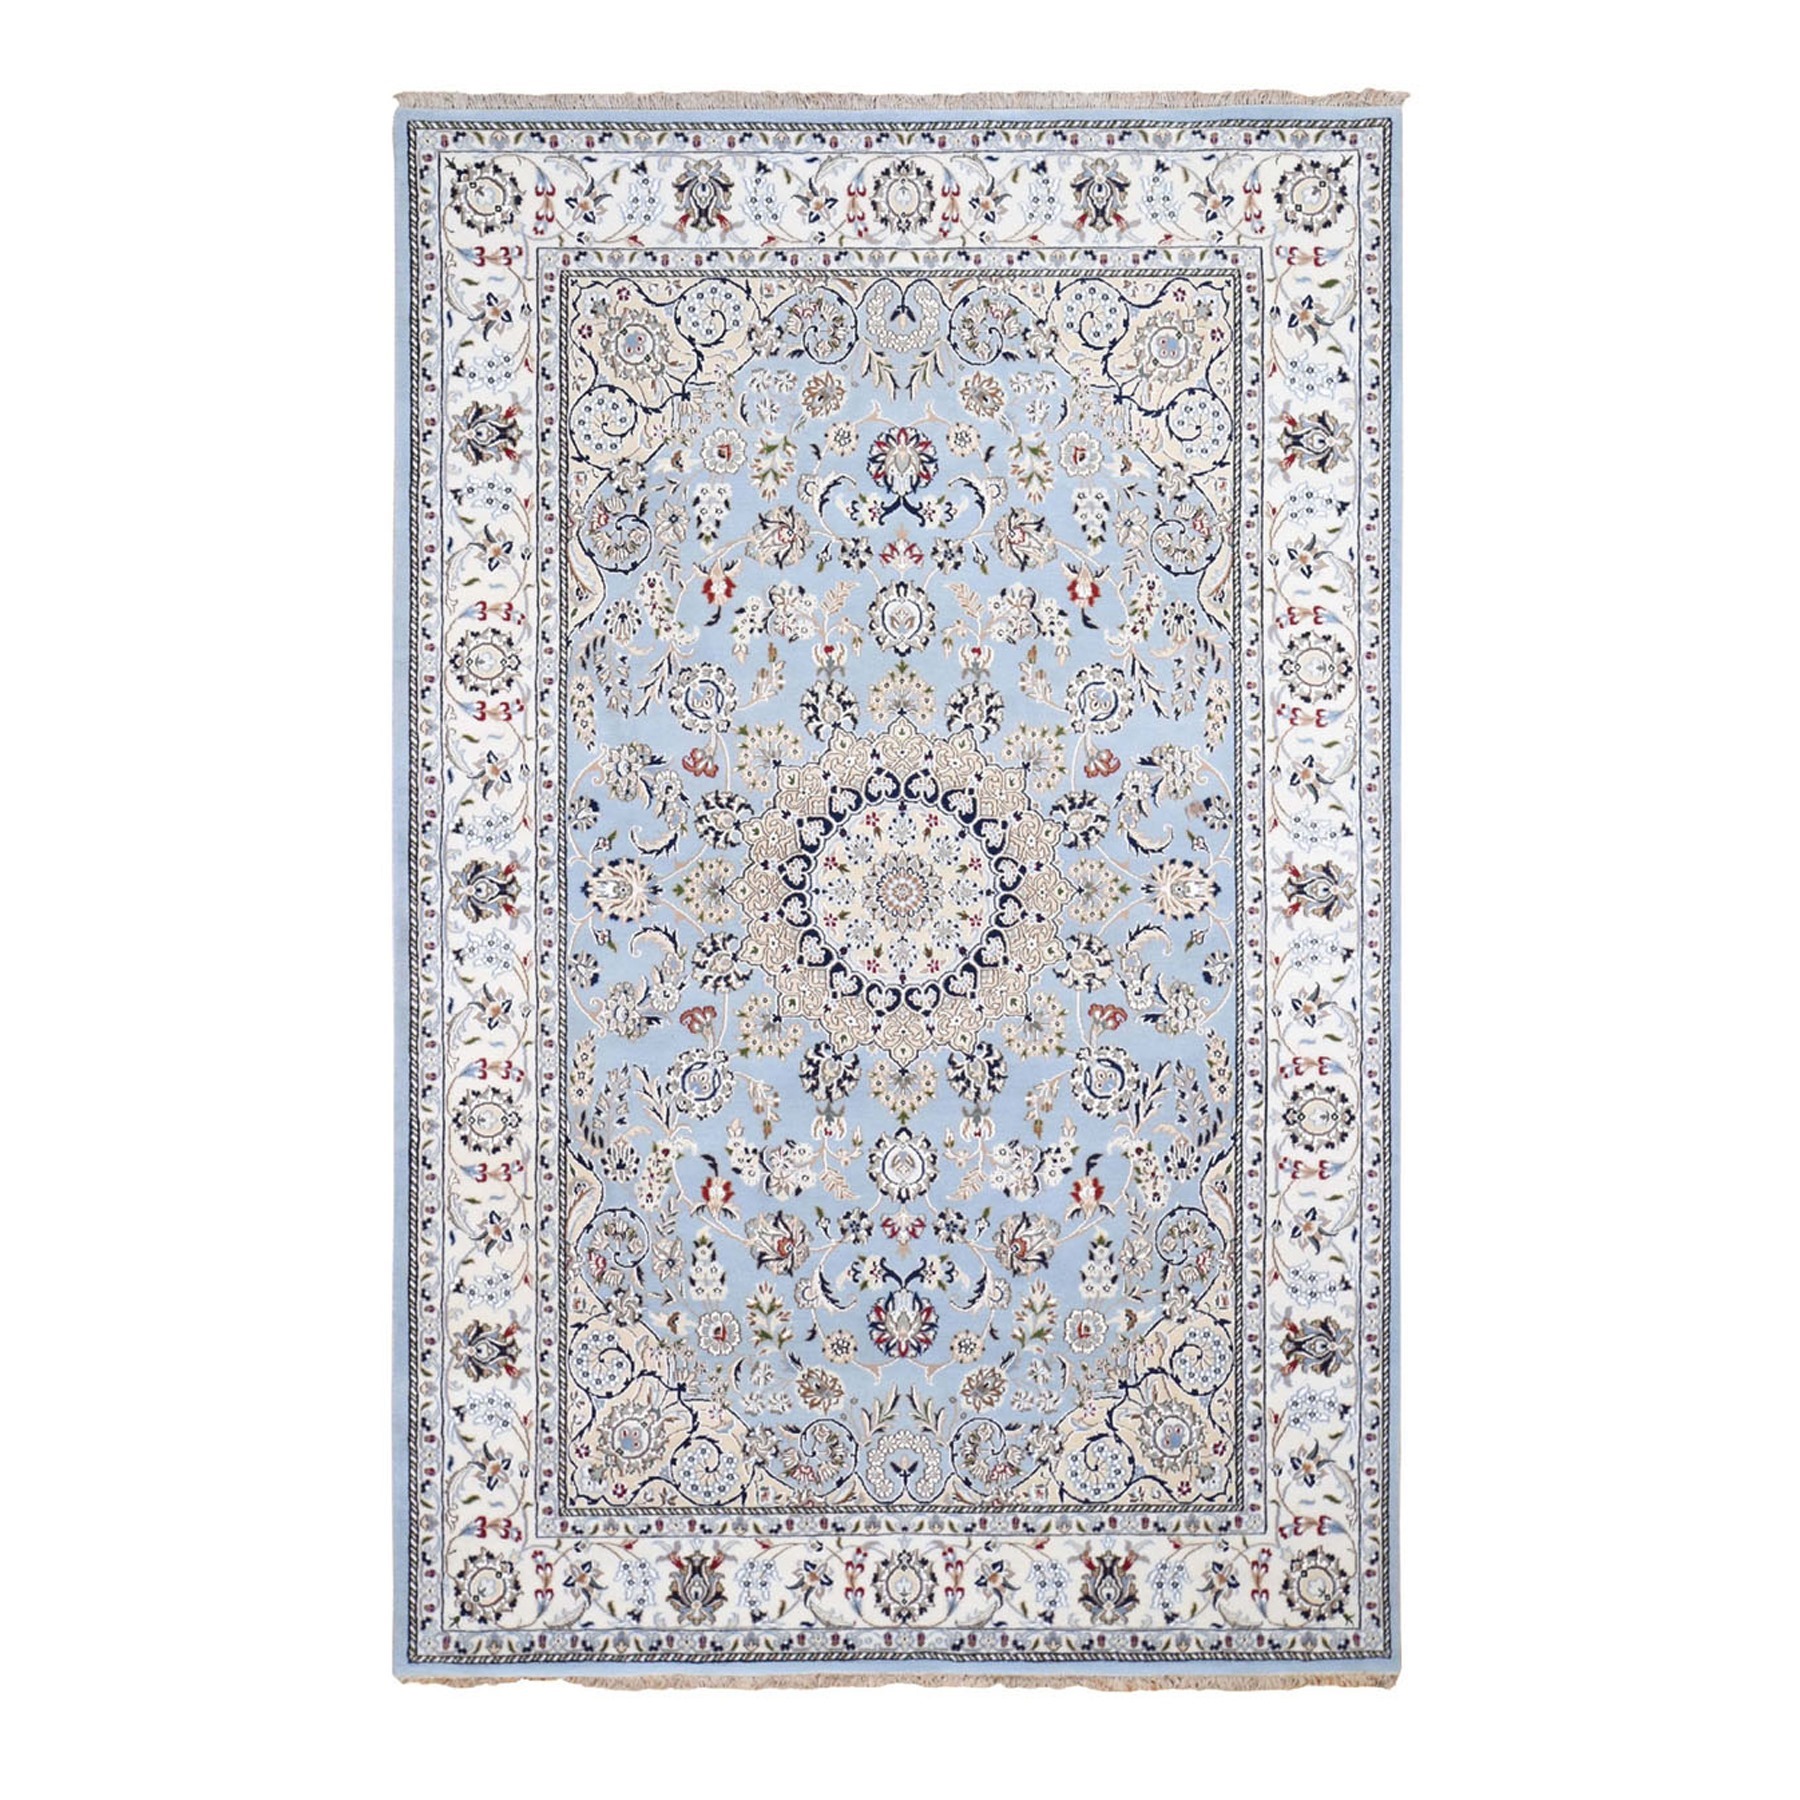 Pirniakan Collection Hand Knotted Blue Rug No: 1133358